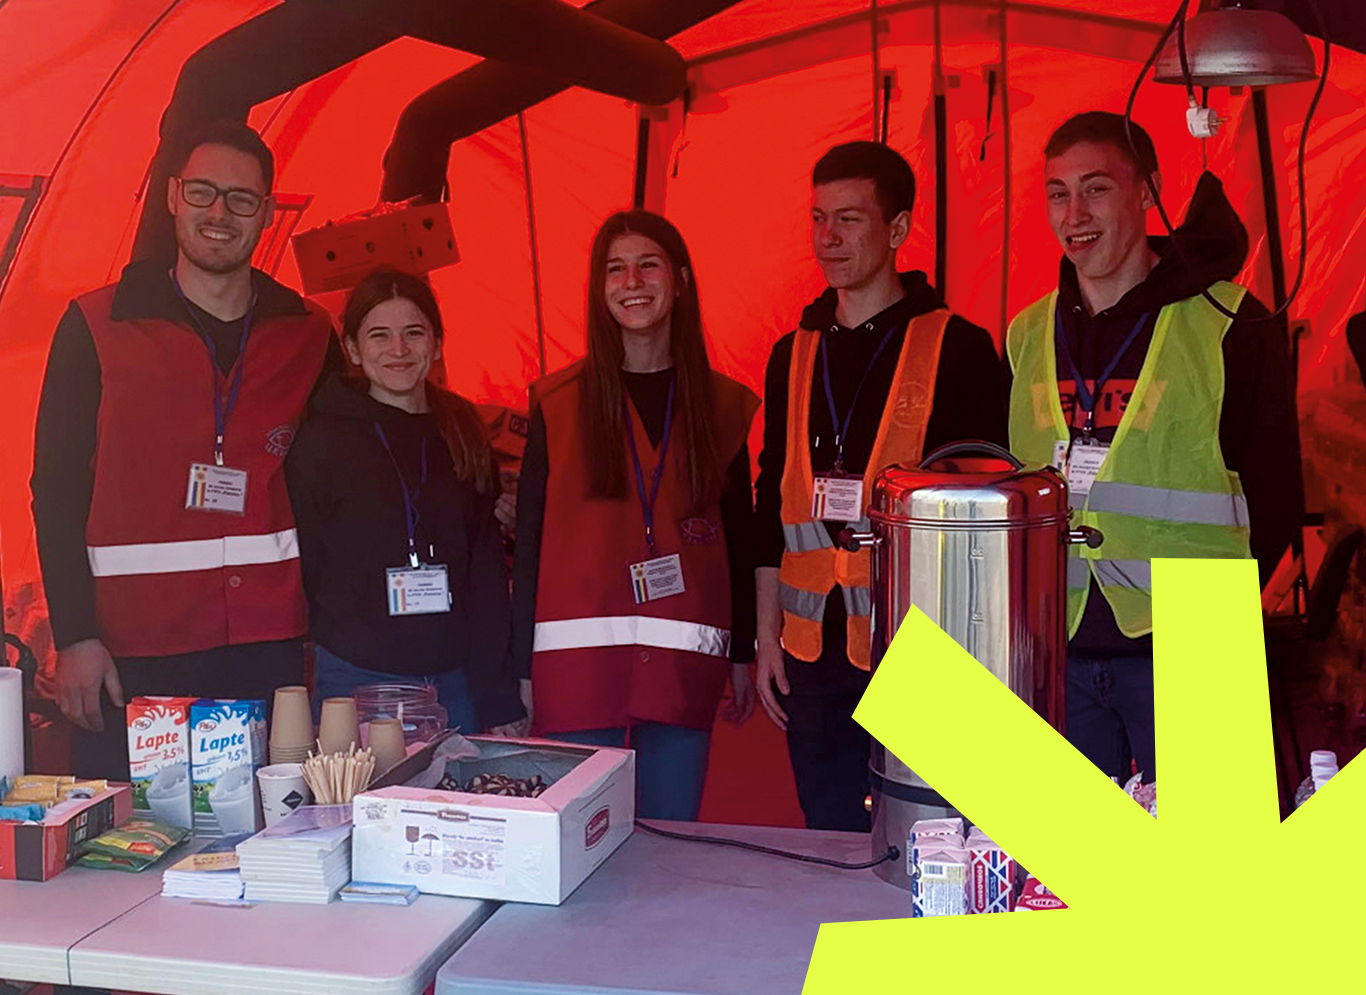 Five people wearing high vis vests in a tent with red background.